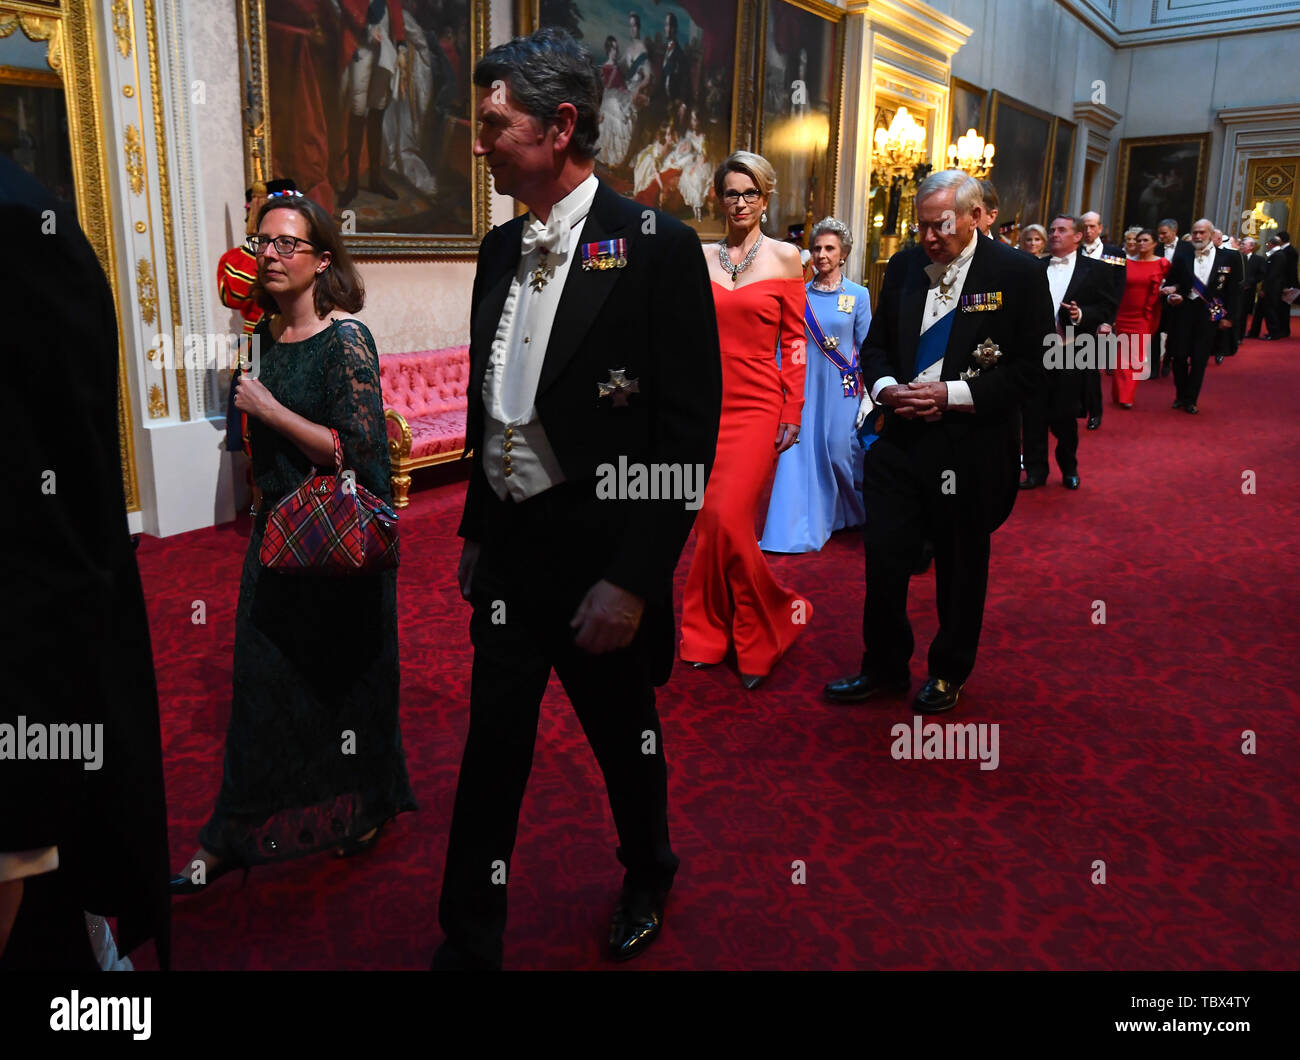 Leader of the House of Lords, Baroness Evans and Vice Admiral Sir Timothy Laurence arrive through the East Gallery during the State Banquet at Buckingham Palace, London, on day one of the US President's three day state visit to the UK. Stock Photo